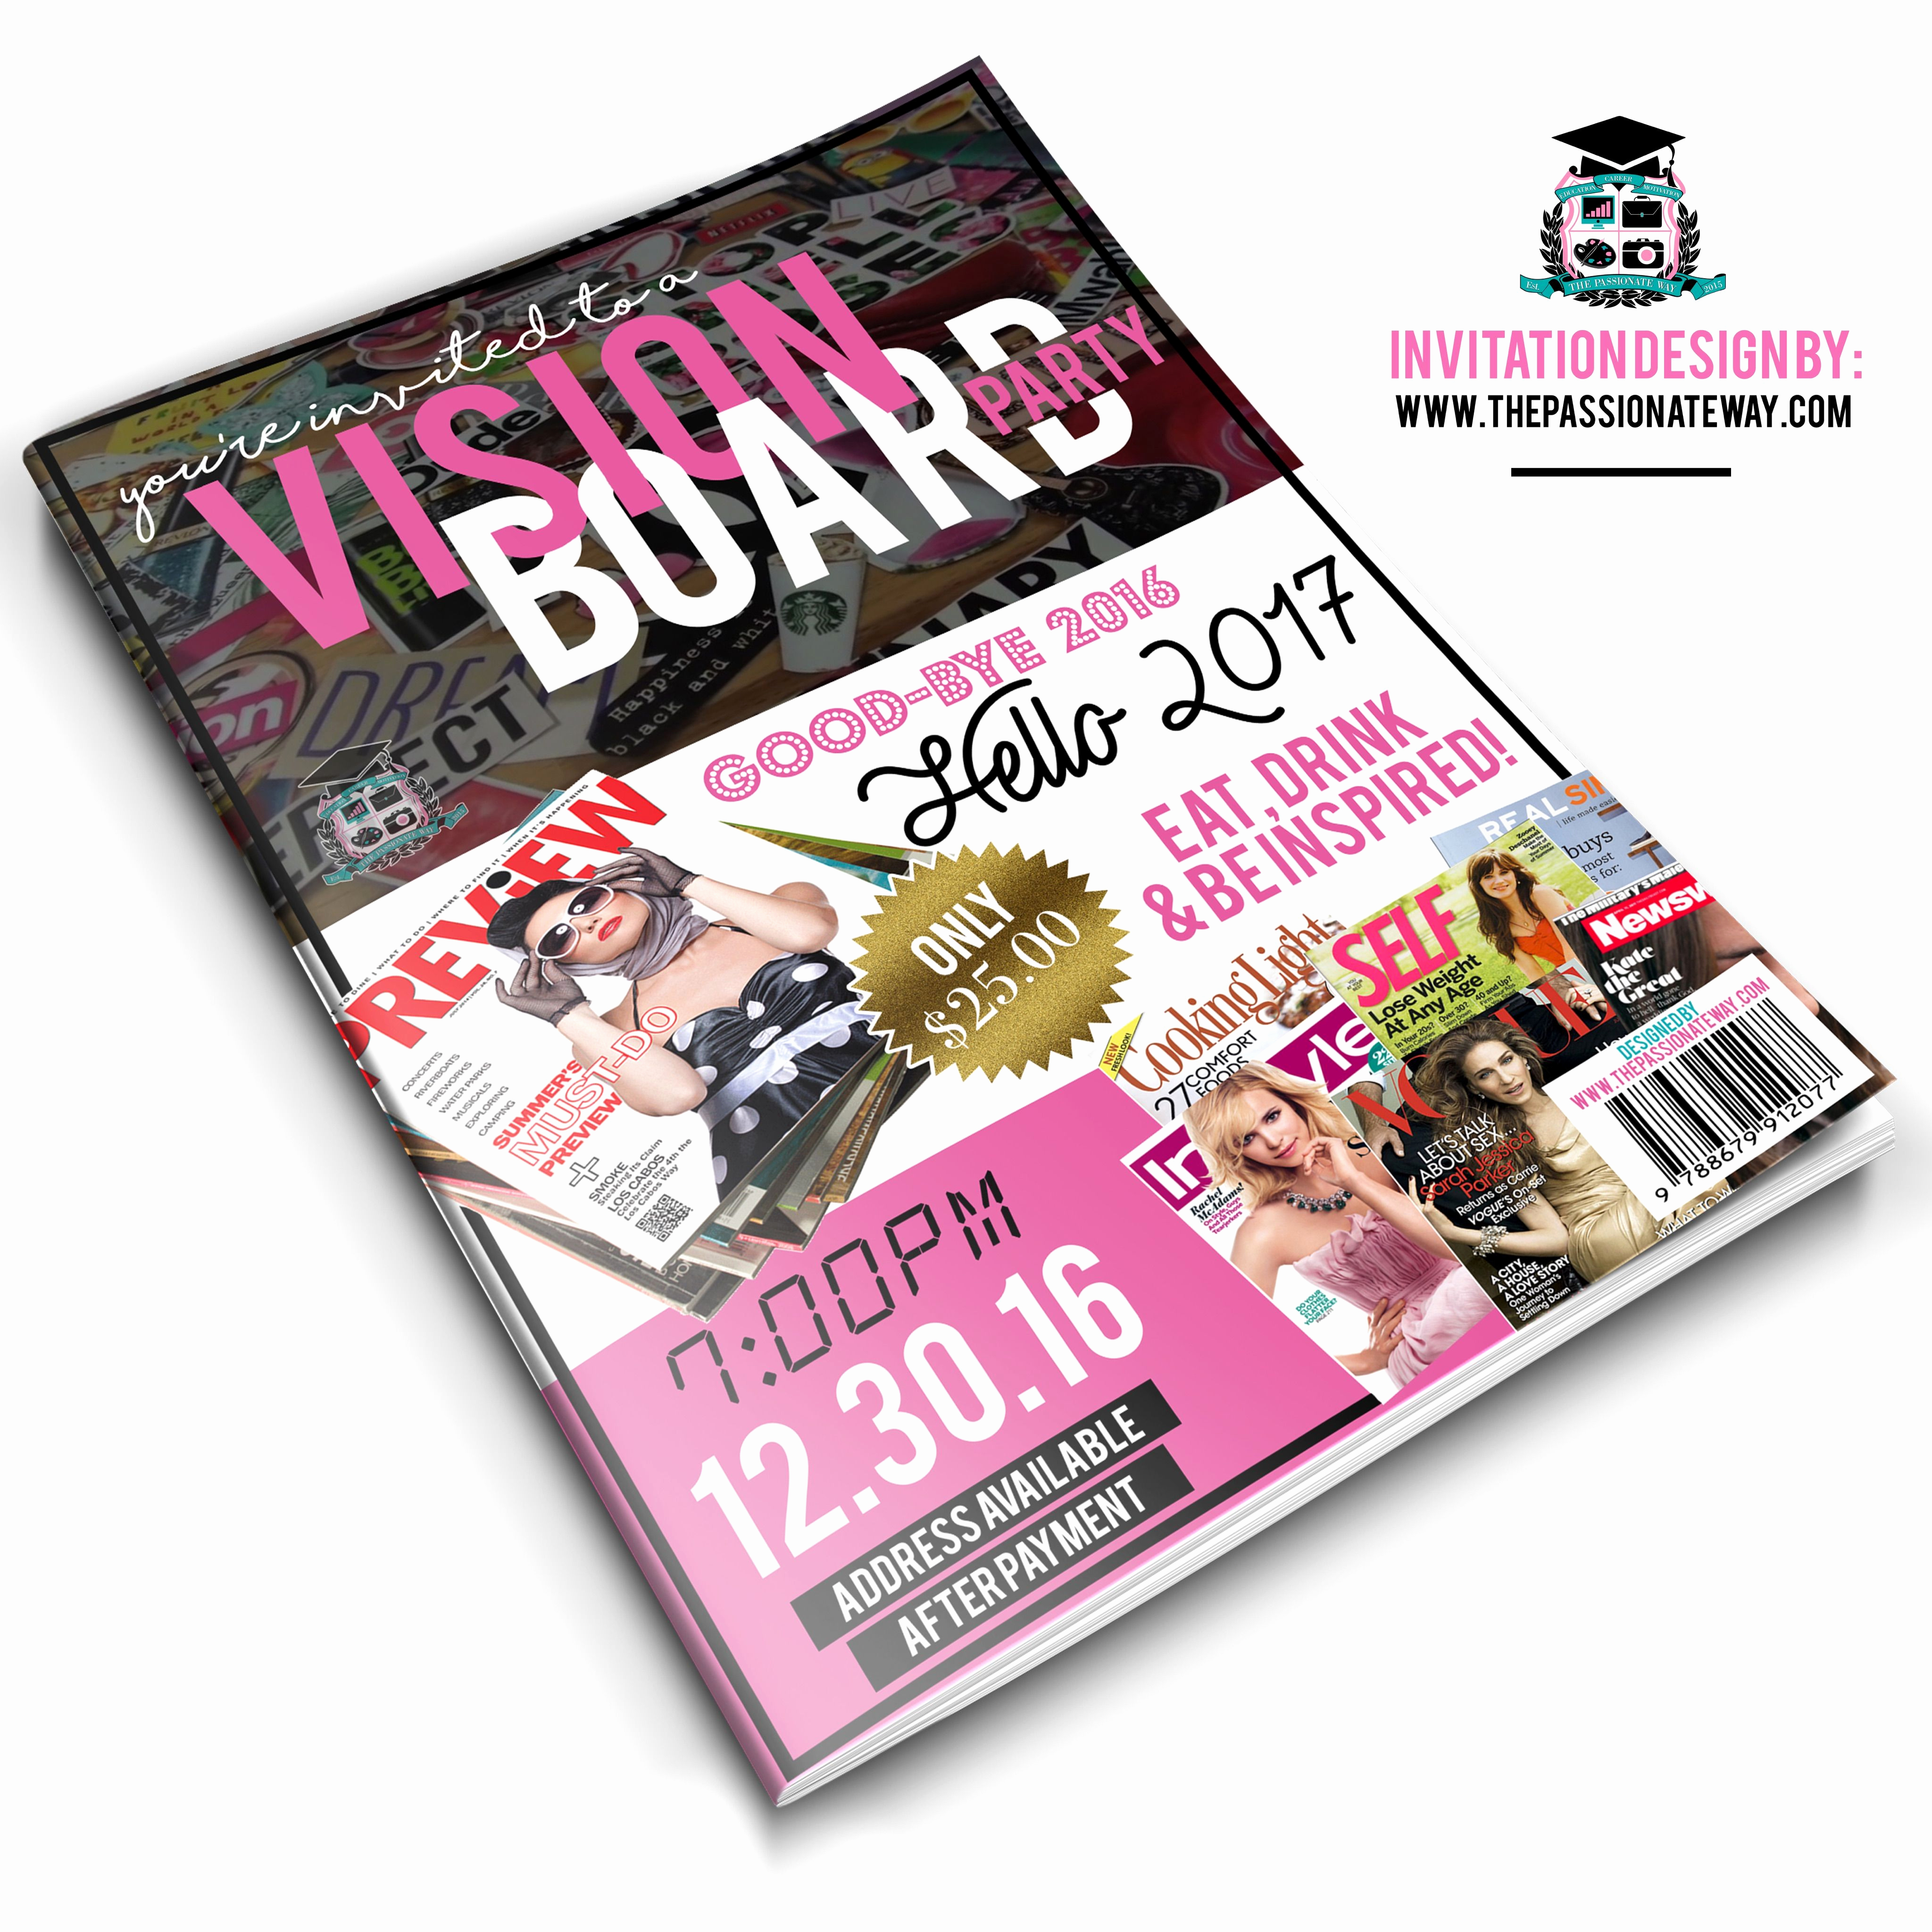 Vision Board Party Invitation New Vision Board Party Flyer or Invitation by